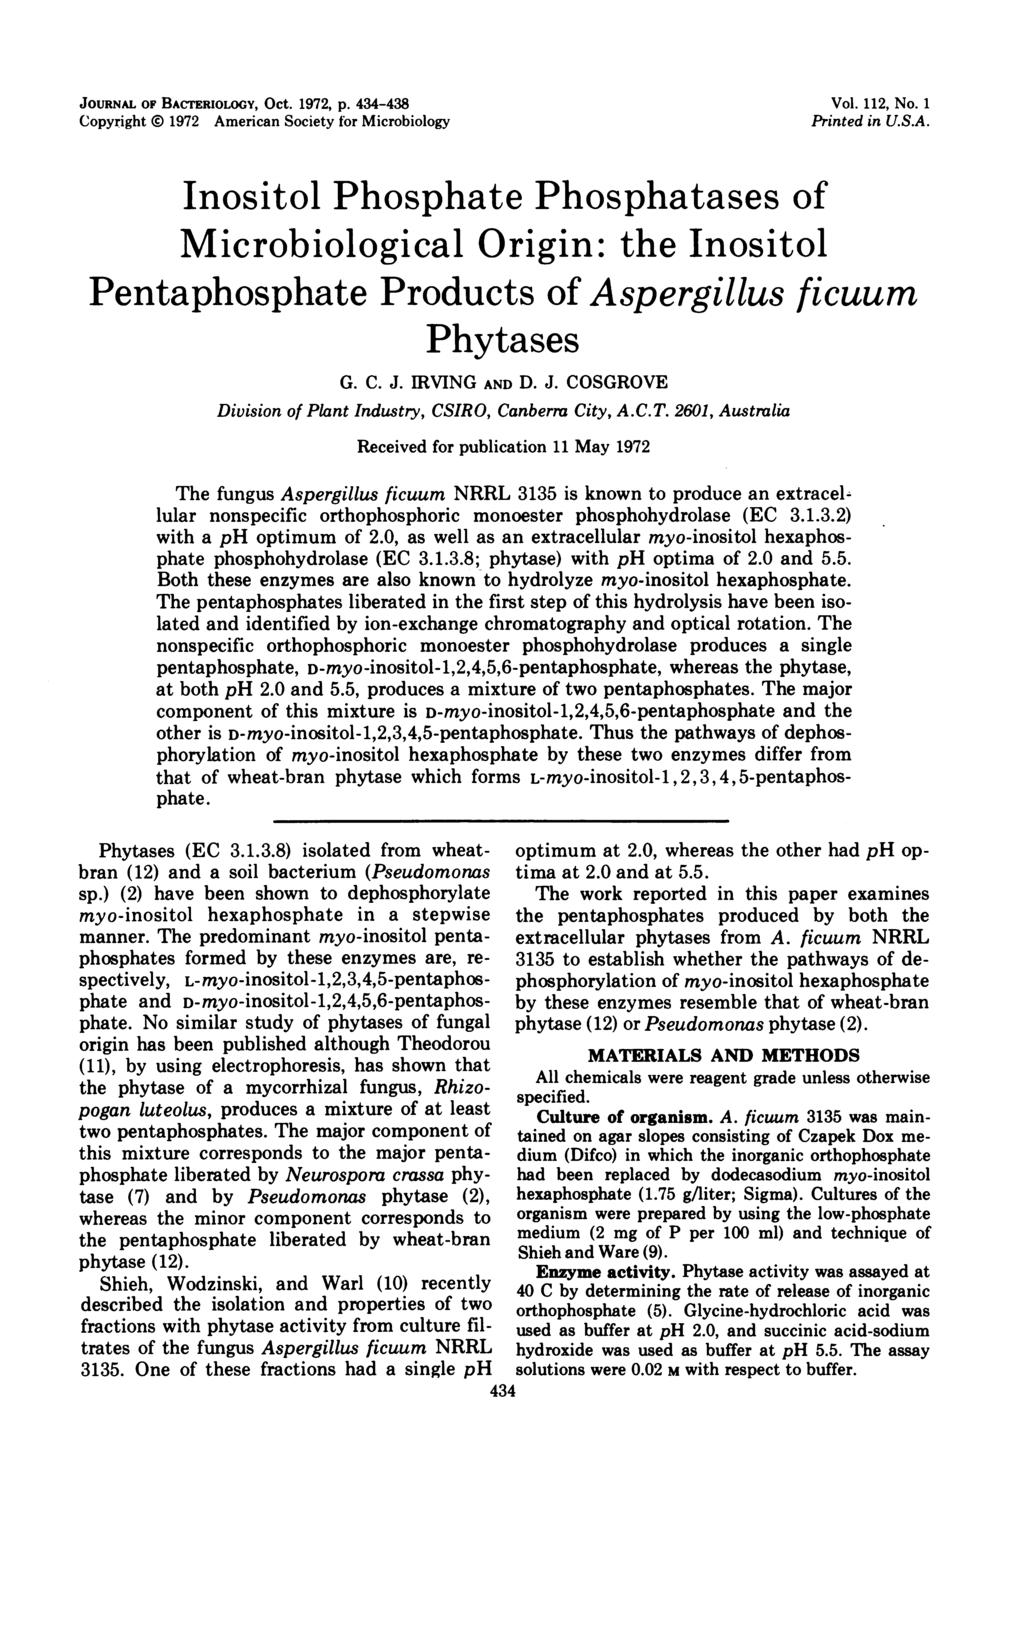 JOURNAL OF BACTERIOLOGY, OCt. 1972, p. 434-438 Copyright 1972 American Society for Microbiology Vol. 112, No. 1 Printed in U.S.A. Inositol Phosphate Phosphatases of Microbiological Origin: the Inositol Pentaphosphate Products of Aspergillus ficuum Phytases G.